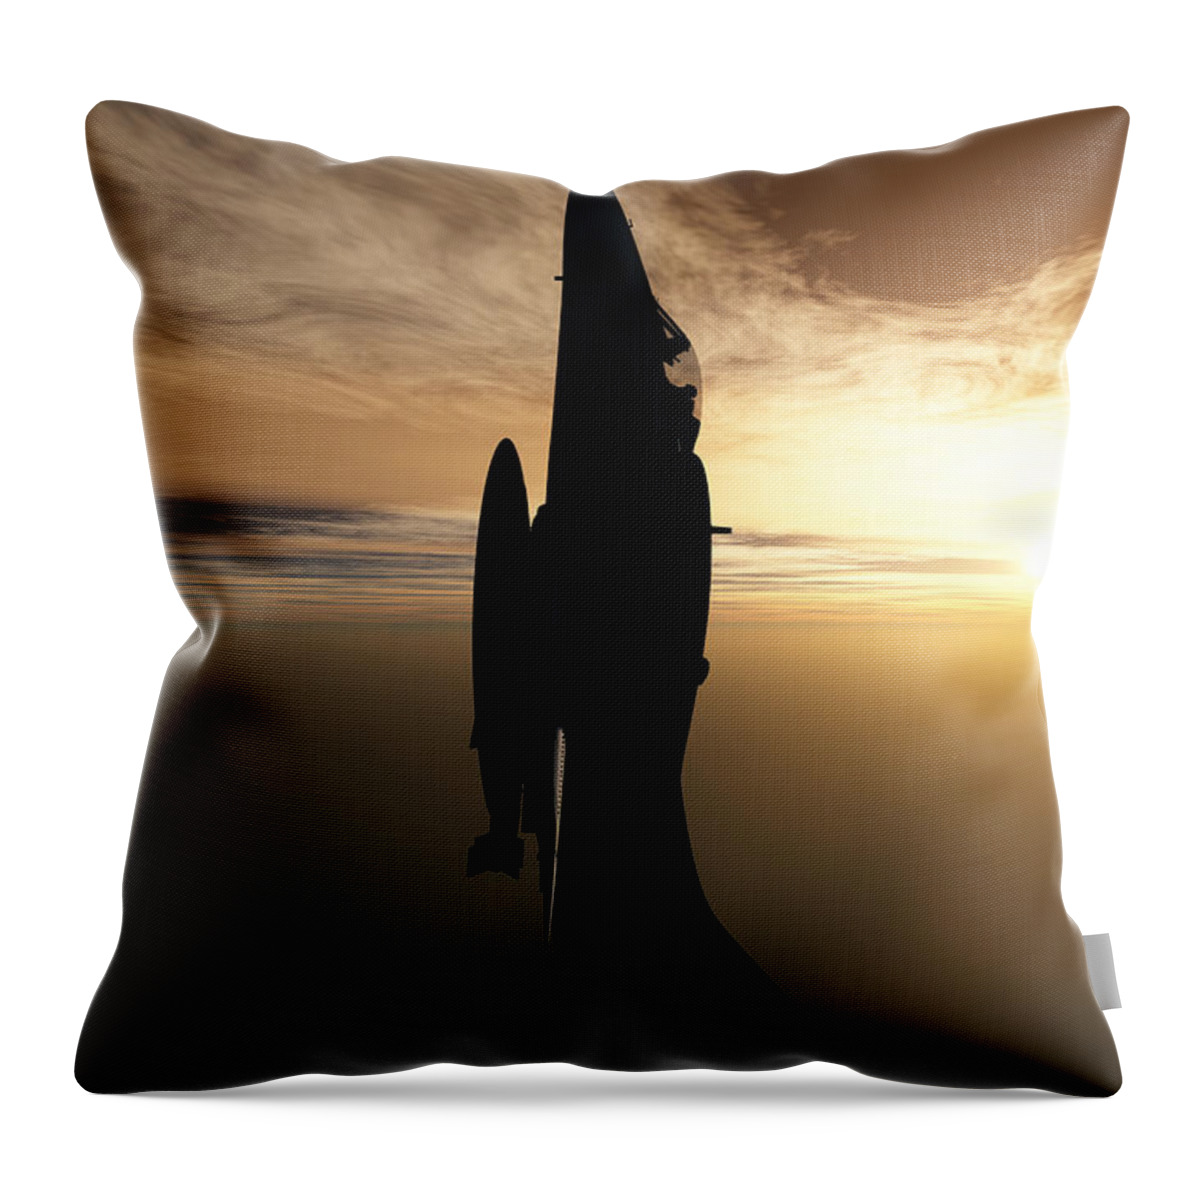 Aviation Throw Pillow featuring the digital art Going Vertical by Richard Rizzo